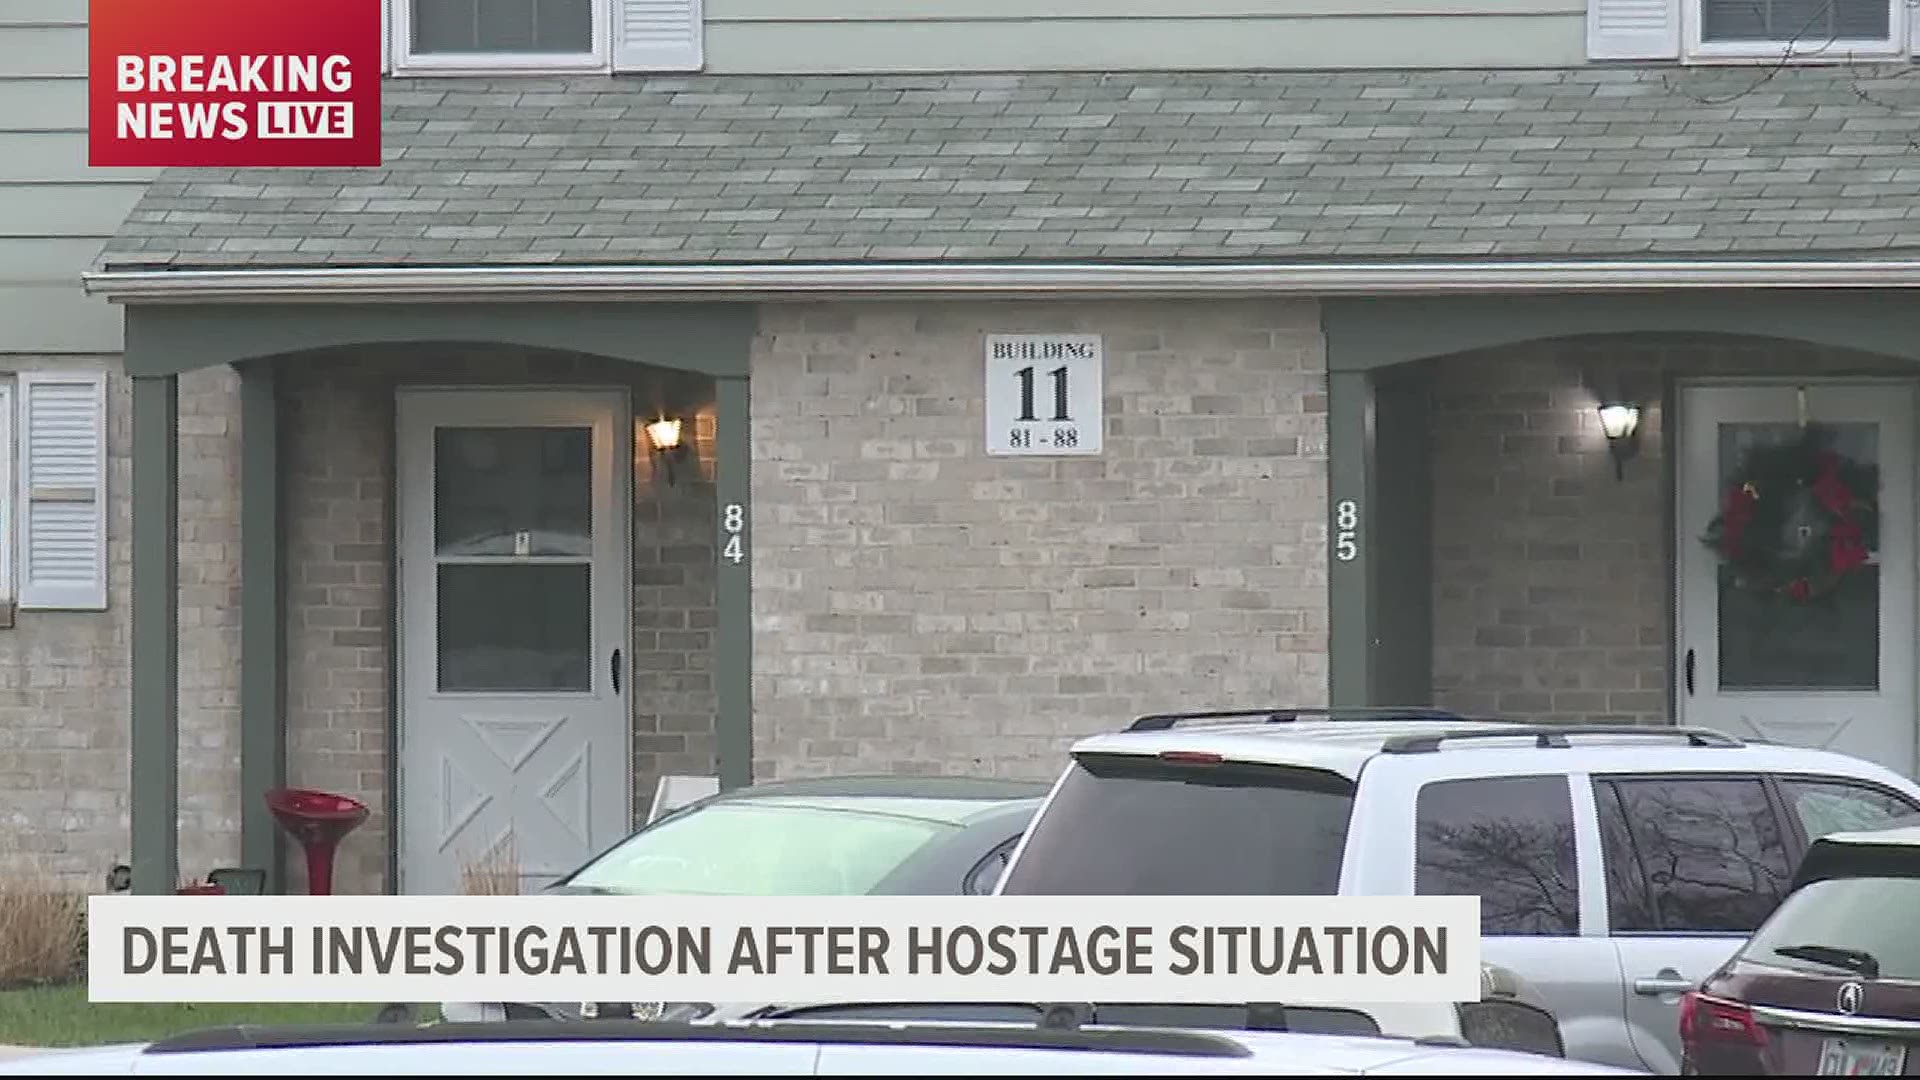 The Lancaster County District Attorney tweeted that a man died after a hostage situation in Manheim Township that began on Tuesday evening.